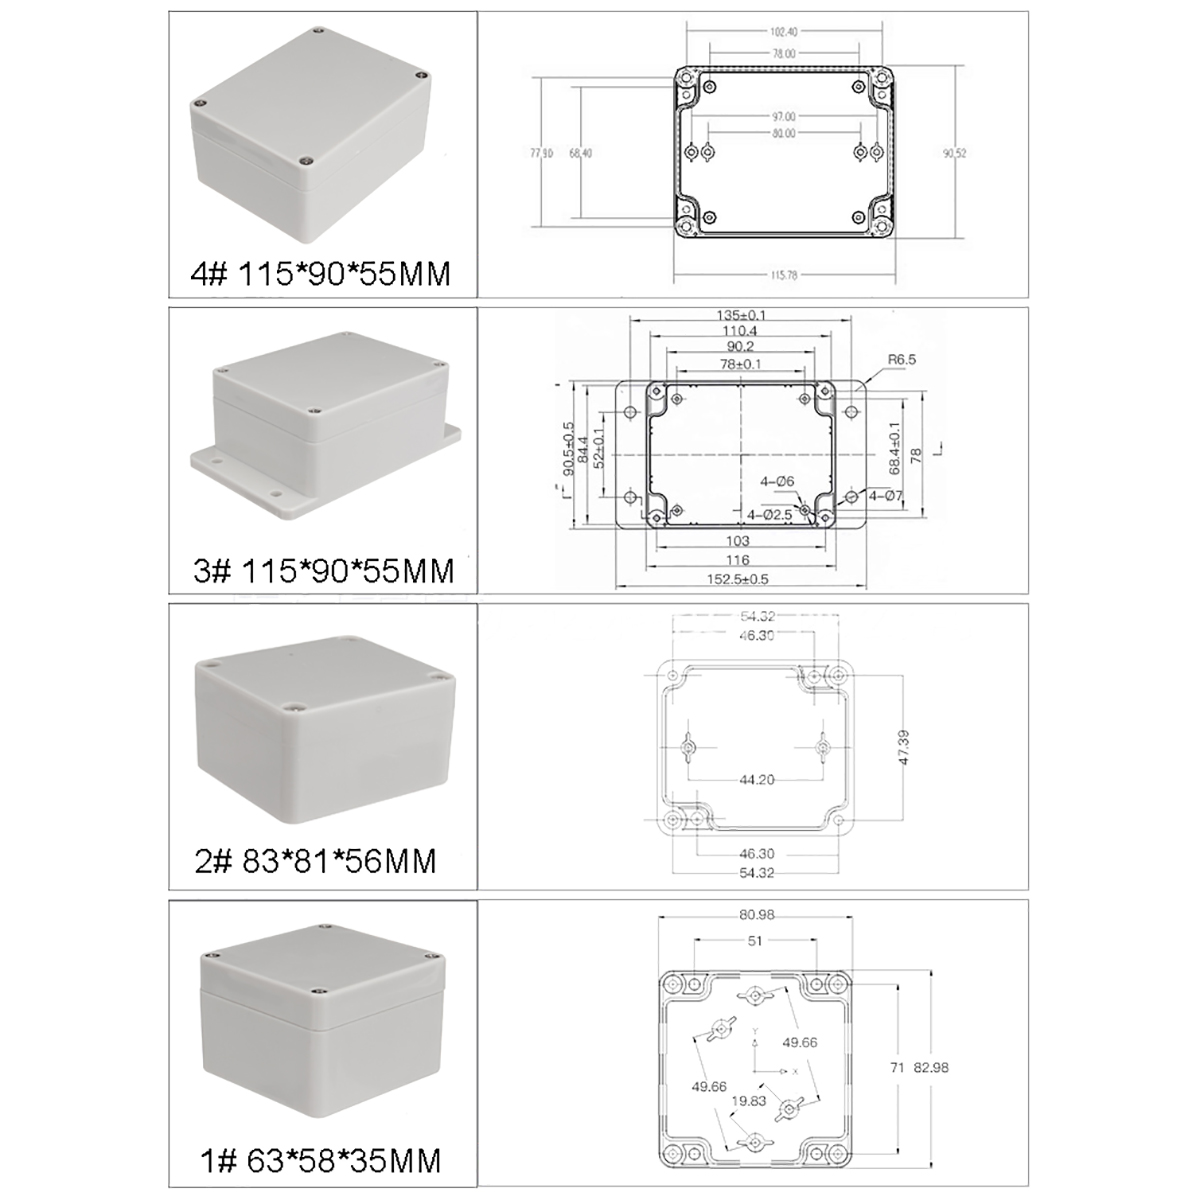 Waterproof-Plastic-Enclosure-Box-Electronic-Project-Case-Electrical-Project-Box-Outdoor-Junction-Box-1678840-5